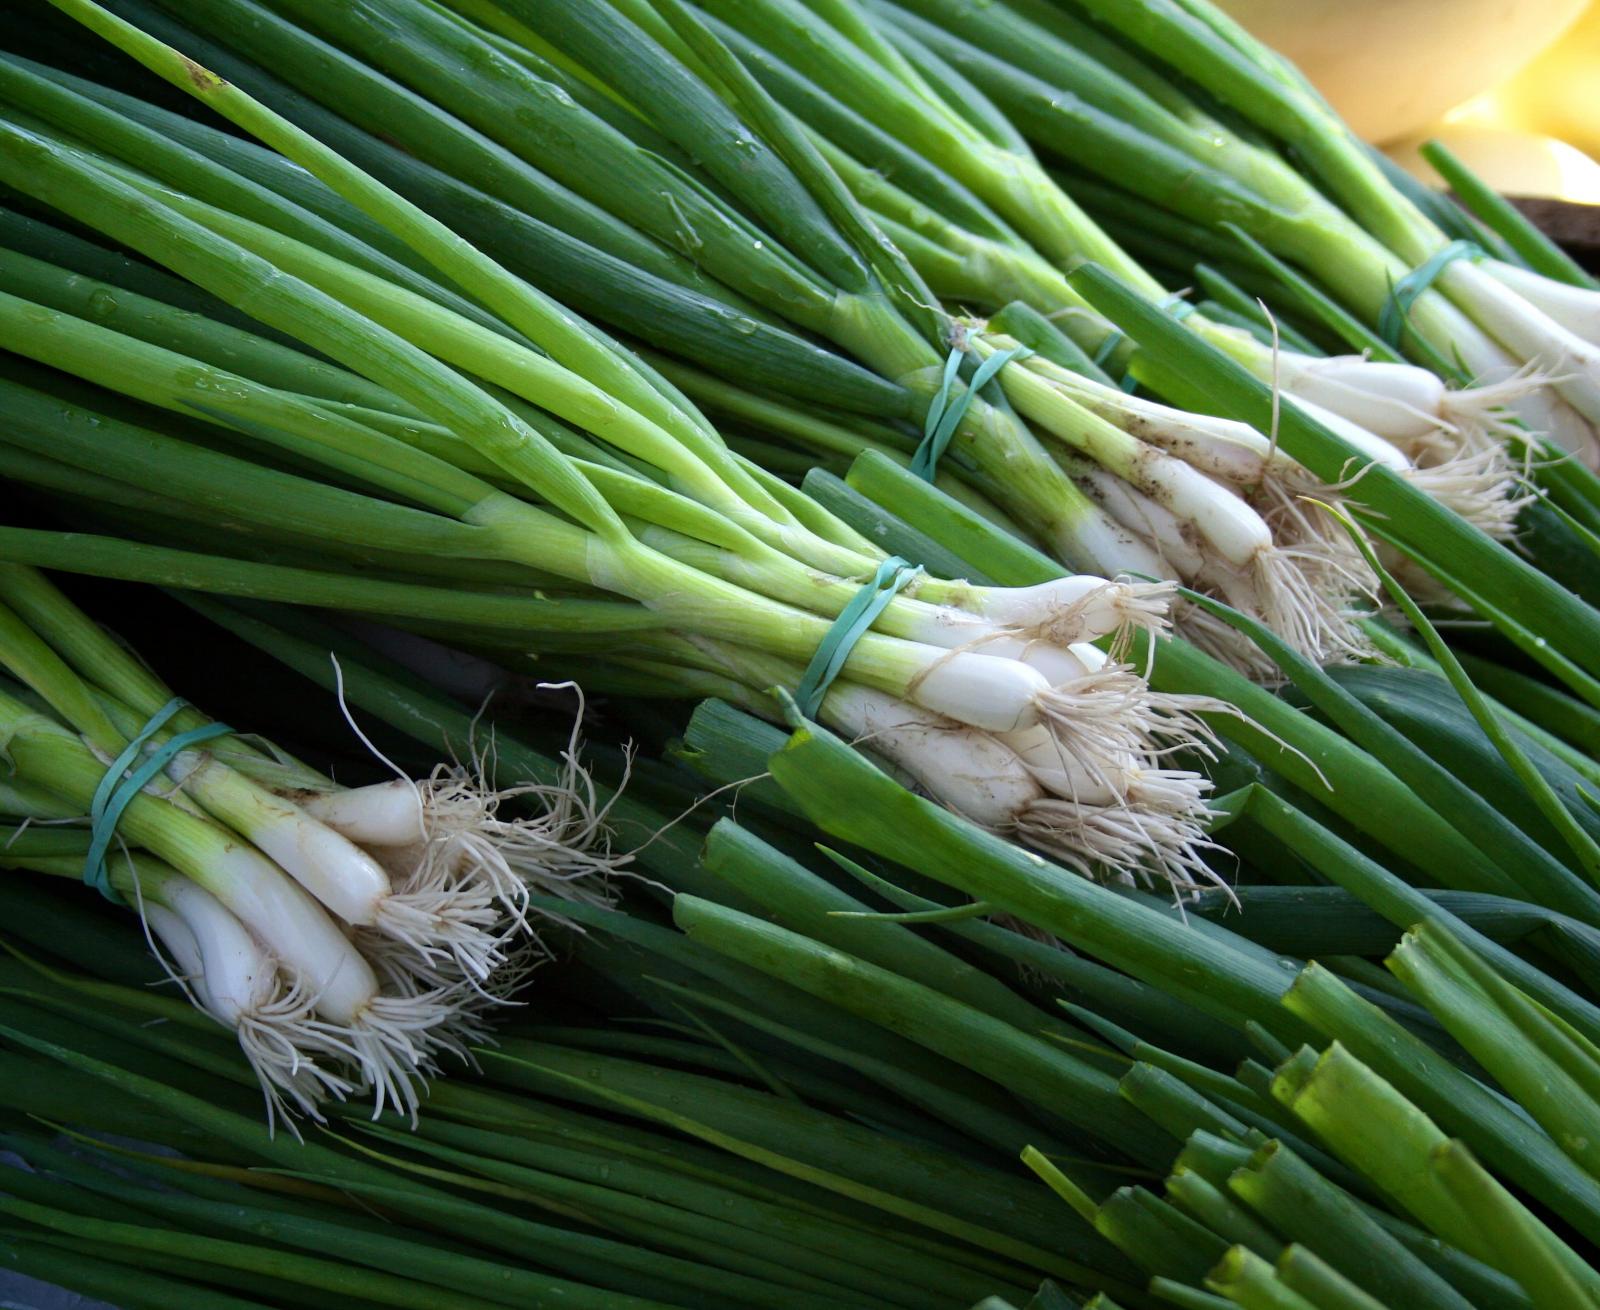 Green Onion Bunches